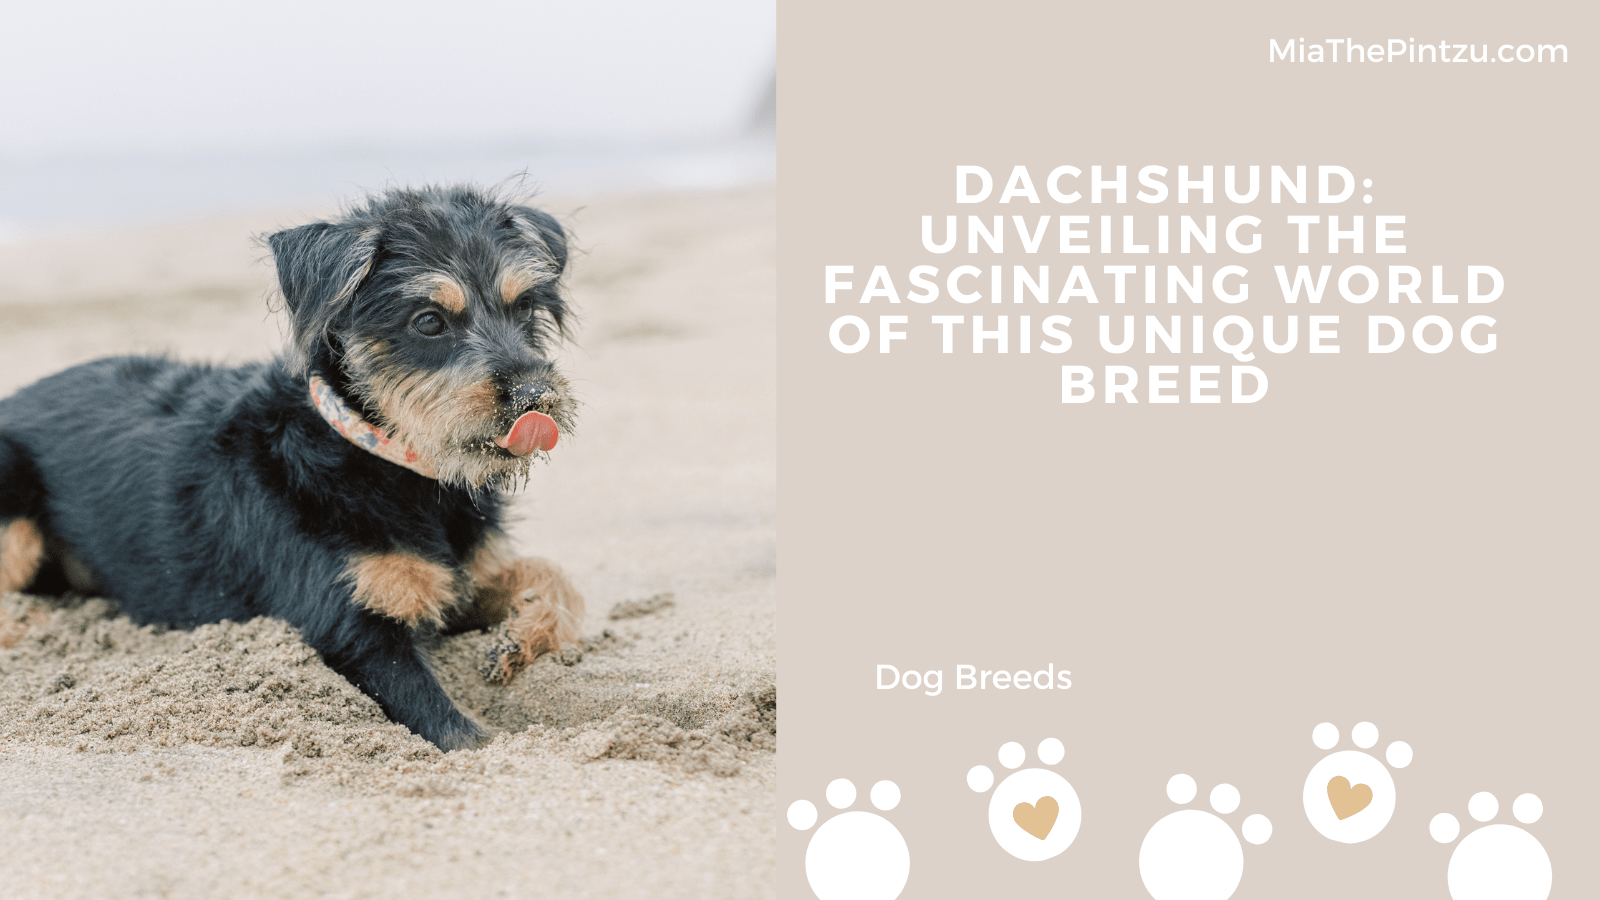 Dachshund: Unveiling the Fascinating World of this Unique Dog Breed